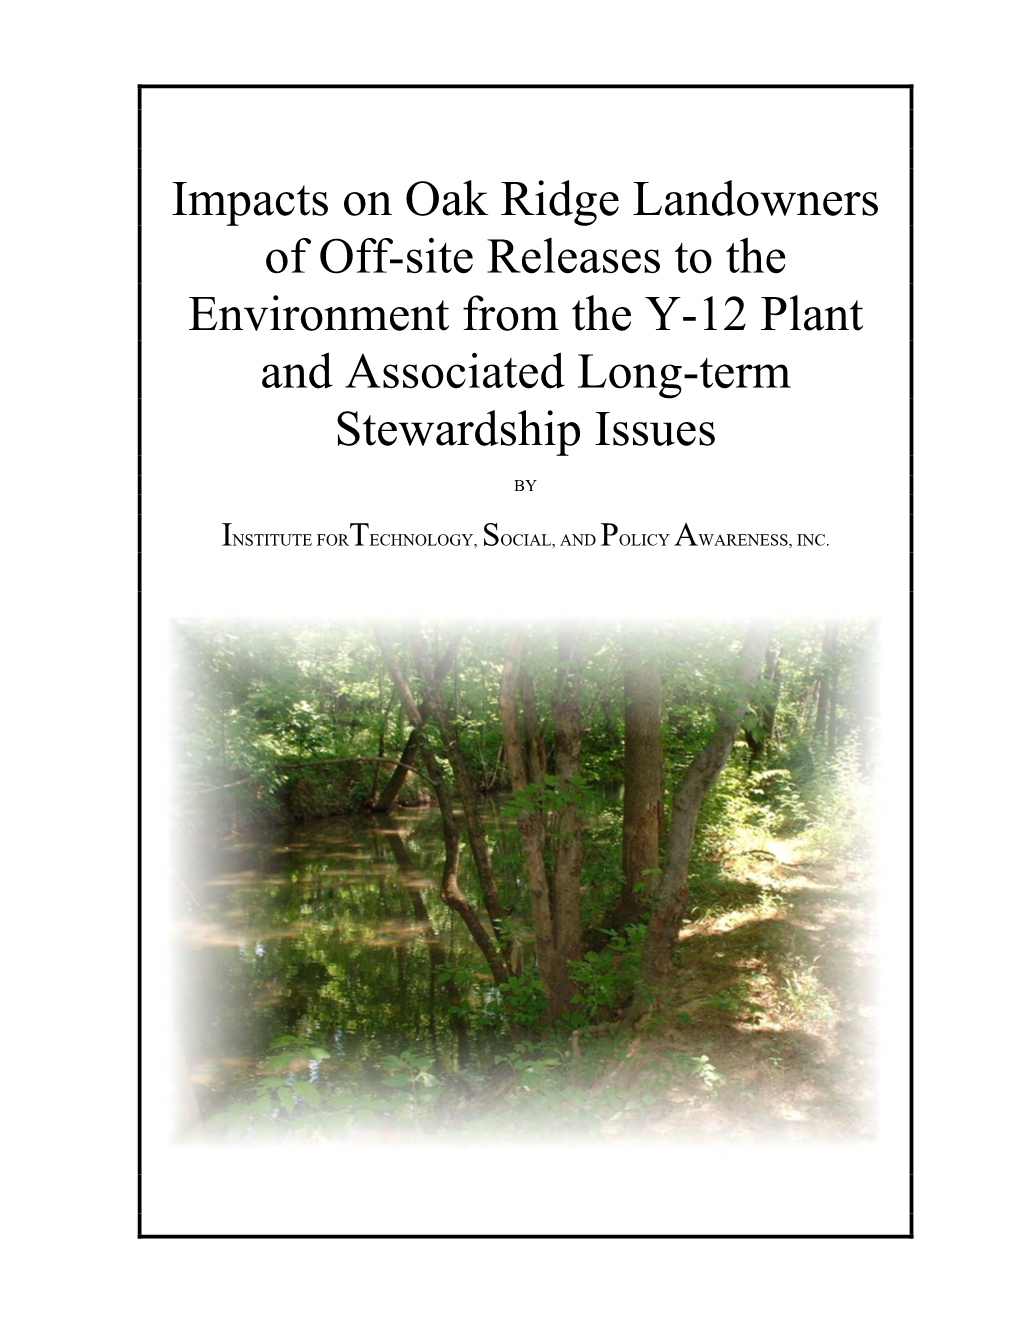 Impacts on Oak Ridge Landowners of Off-Site Releases to the Environment from the Y-12 Plant and Associated Long-Term Stewardship Issues